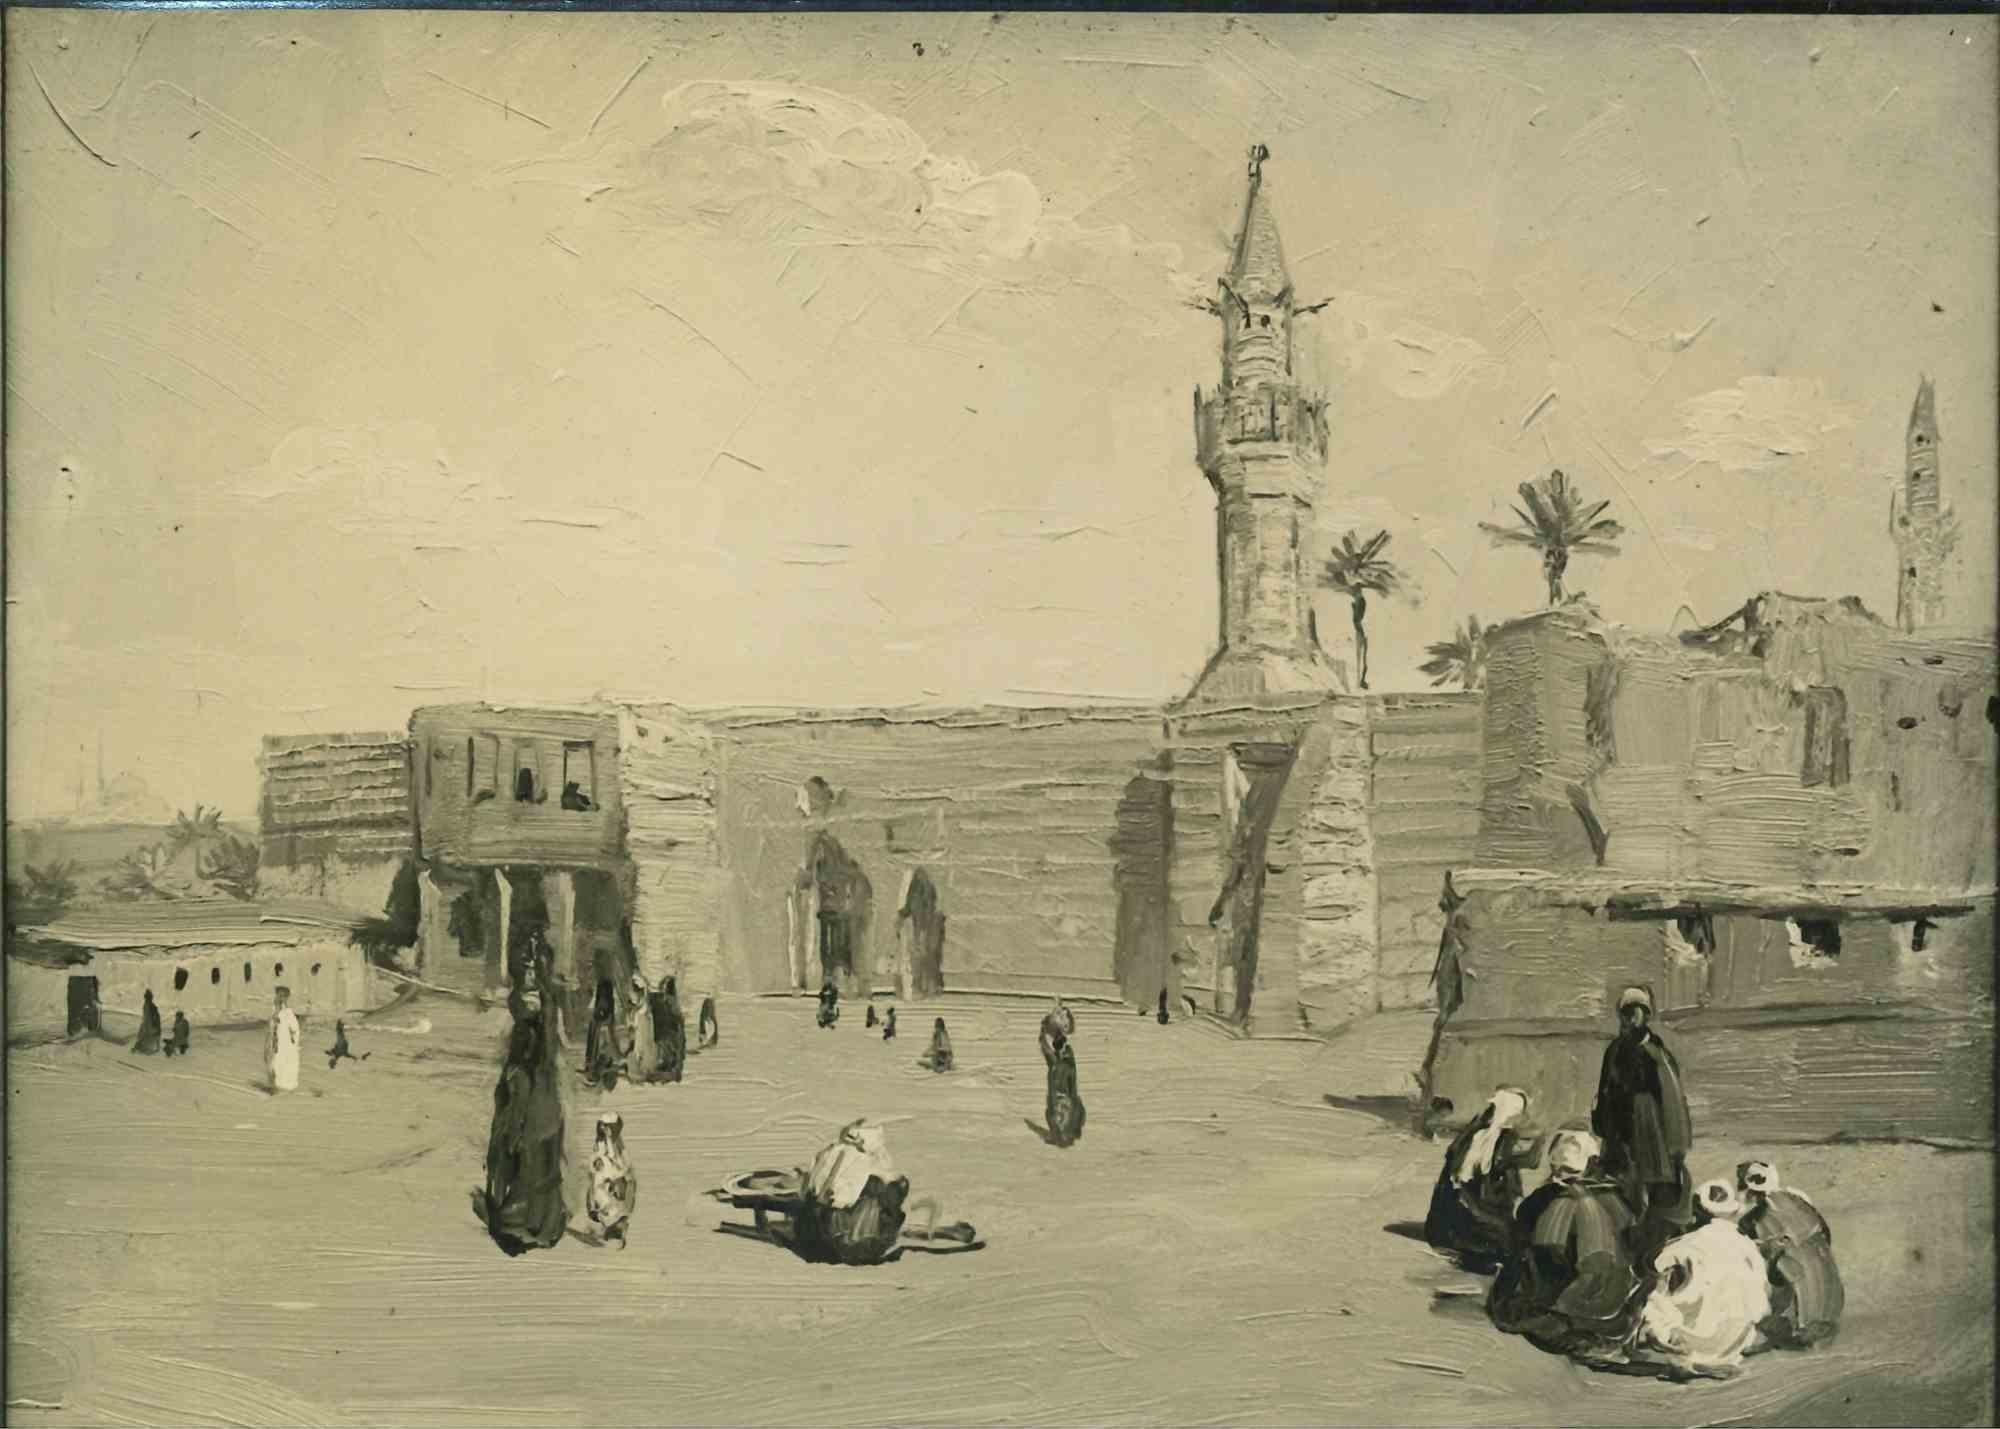 Unknown Portrait Photograph - Vintage Photo of an Orientalist Painting - Cityscape - Early 20th Century